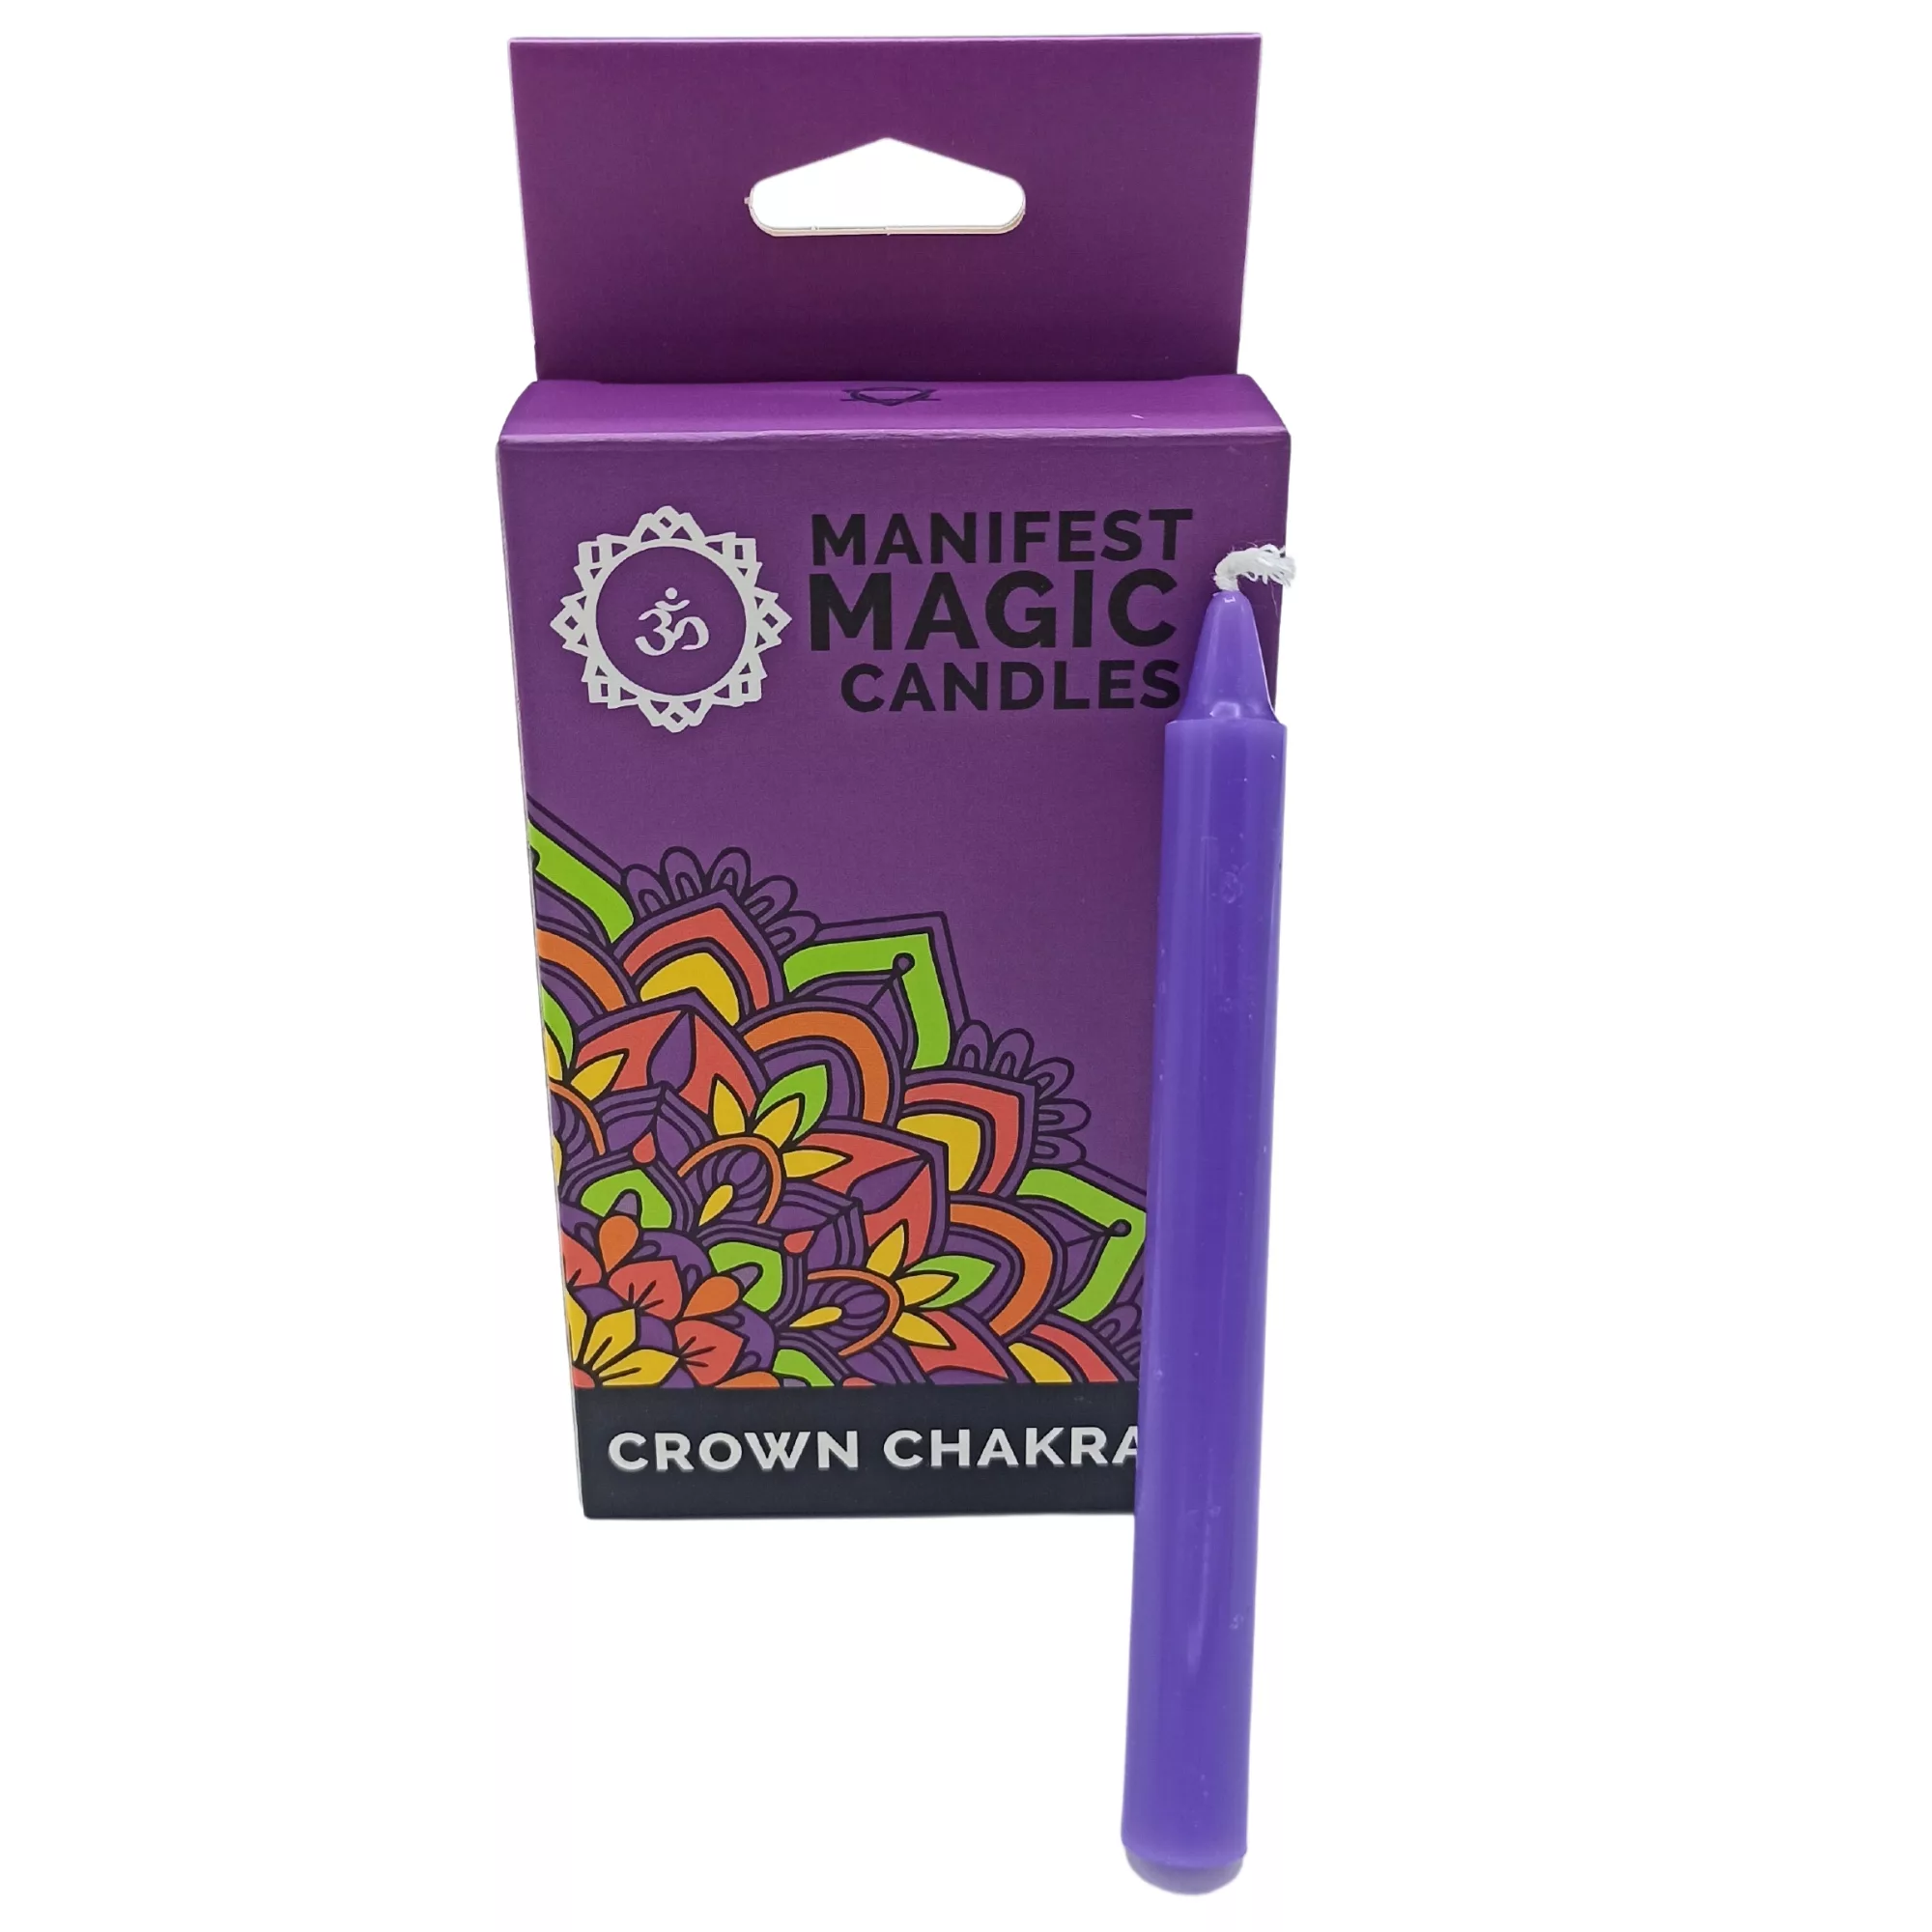 Manifest Magic Candles (pack of 12) – Violet – Crown Chakra